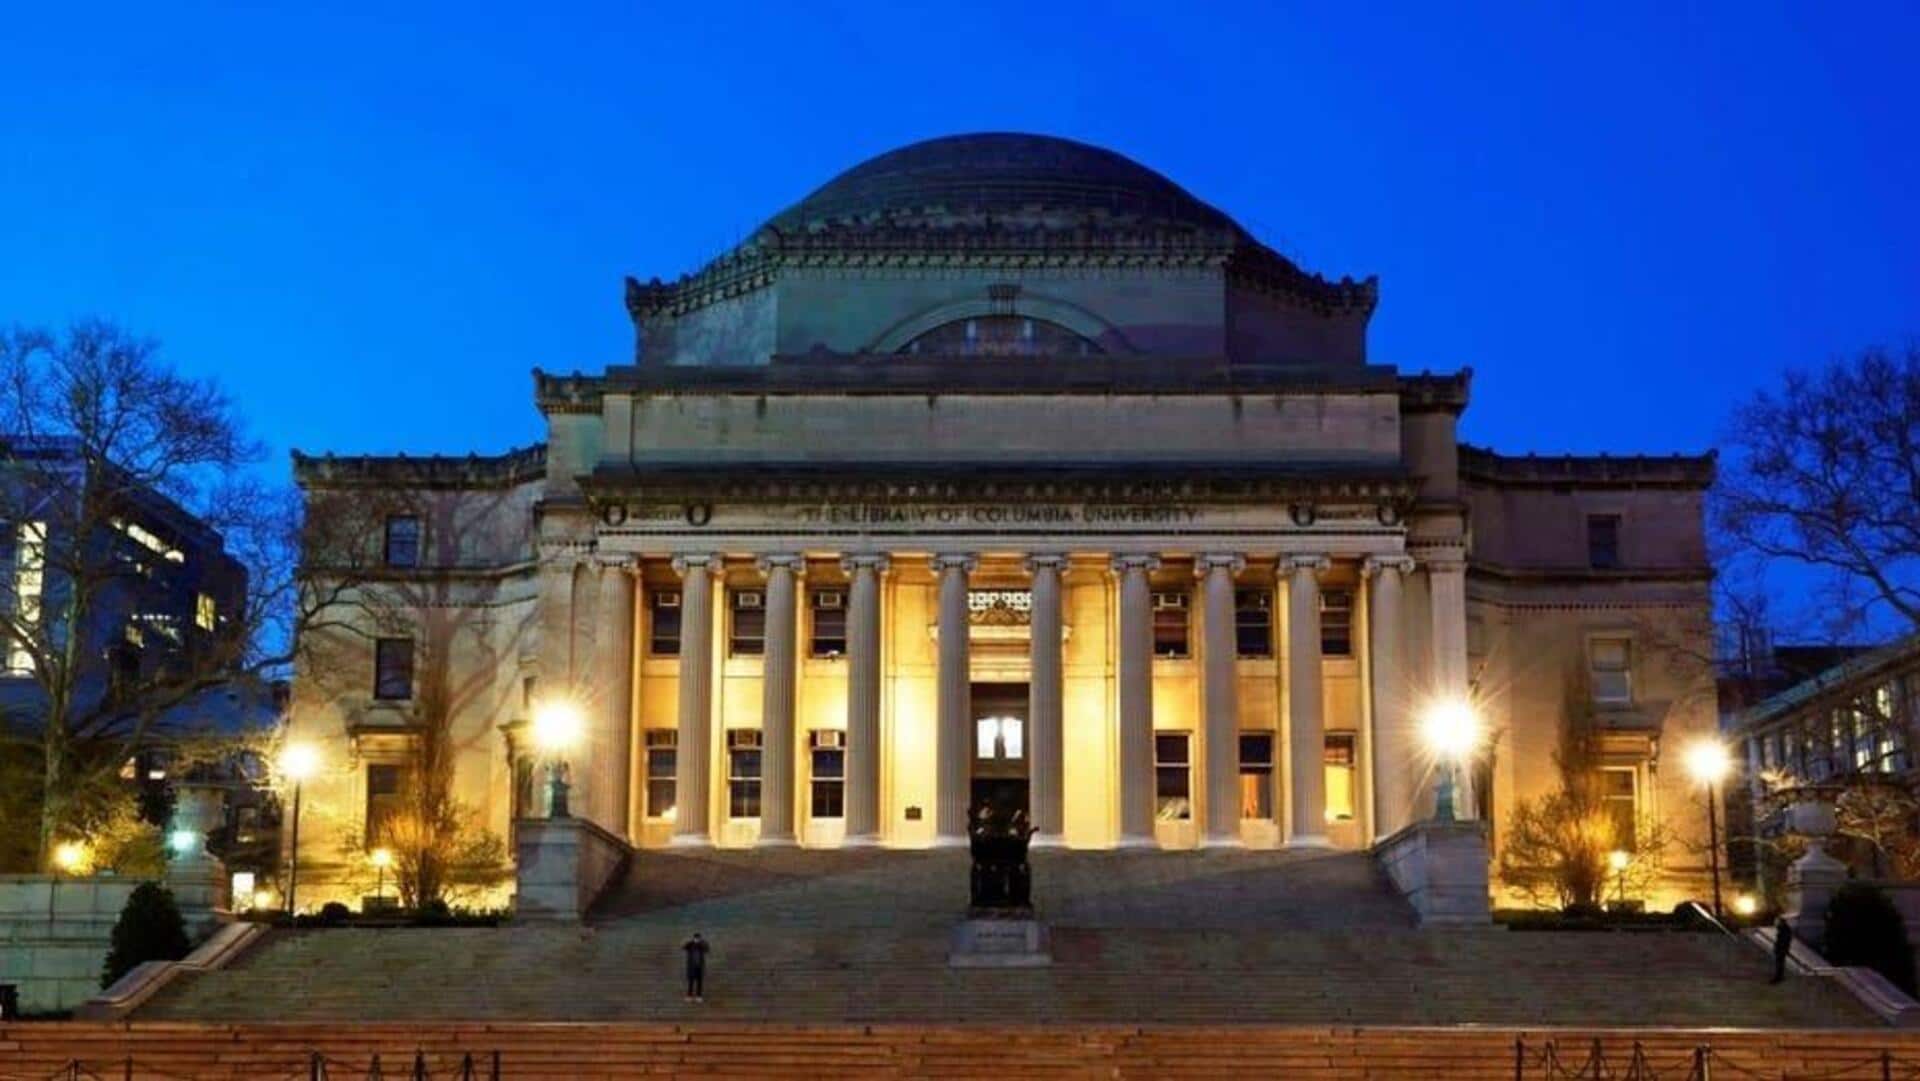 Columbia deans suspended over offensive texts mocking antisemitism